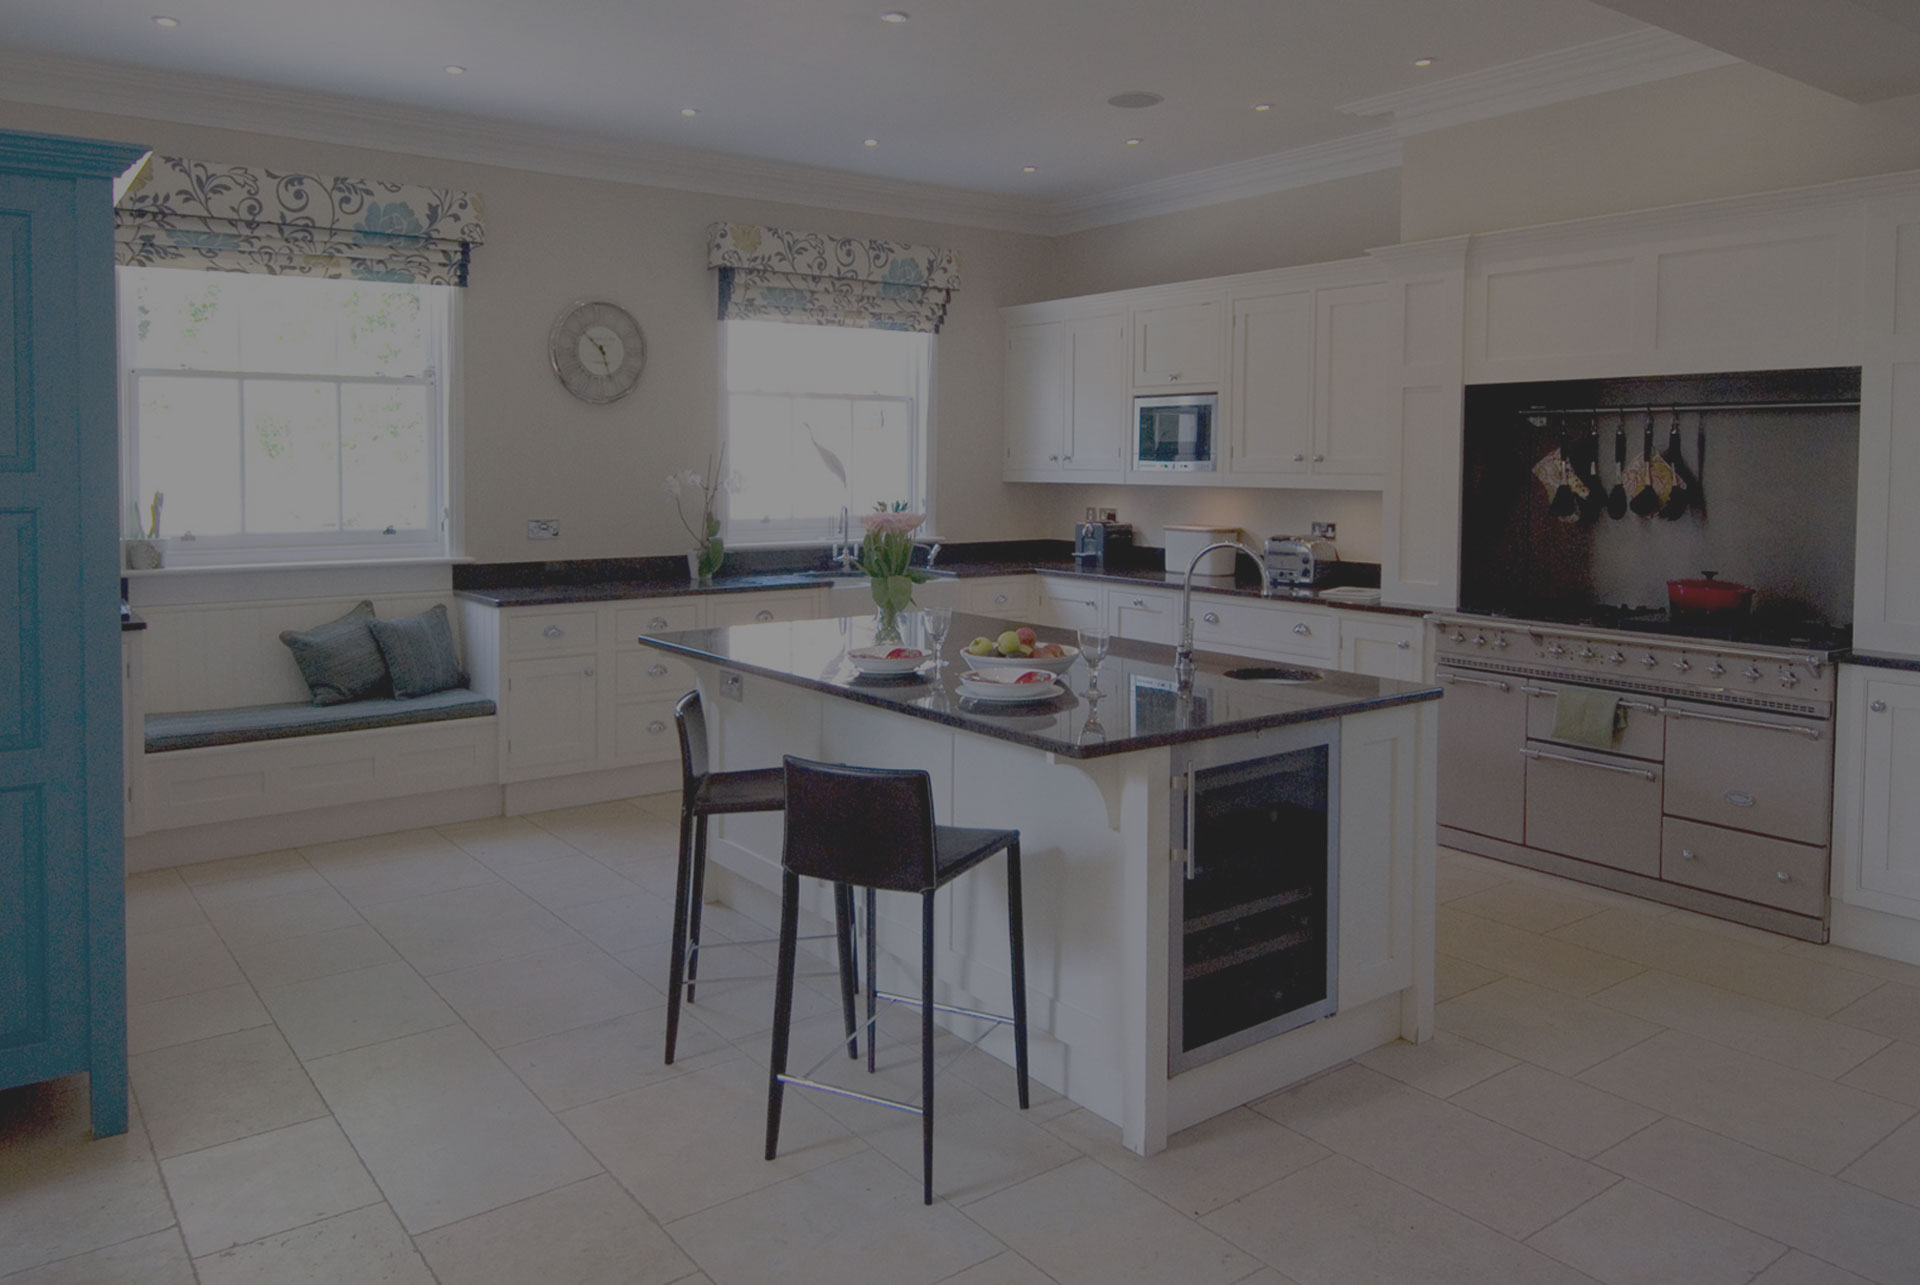 We Specialise in Handcrafted Bespoke Kitchens